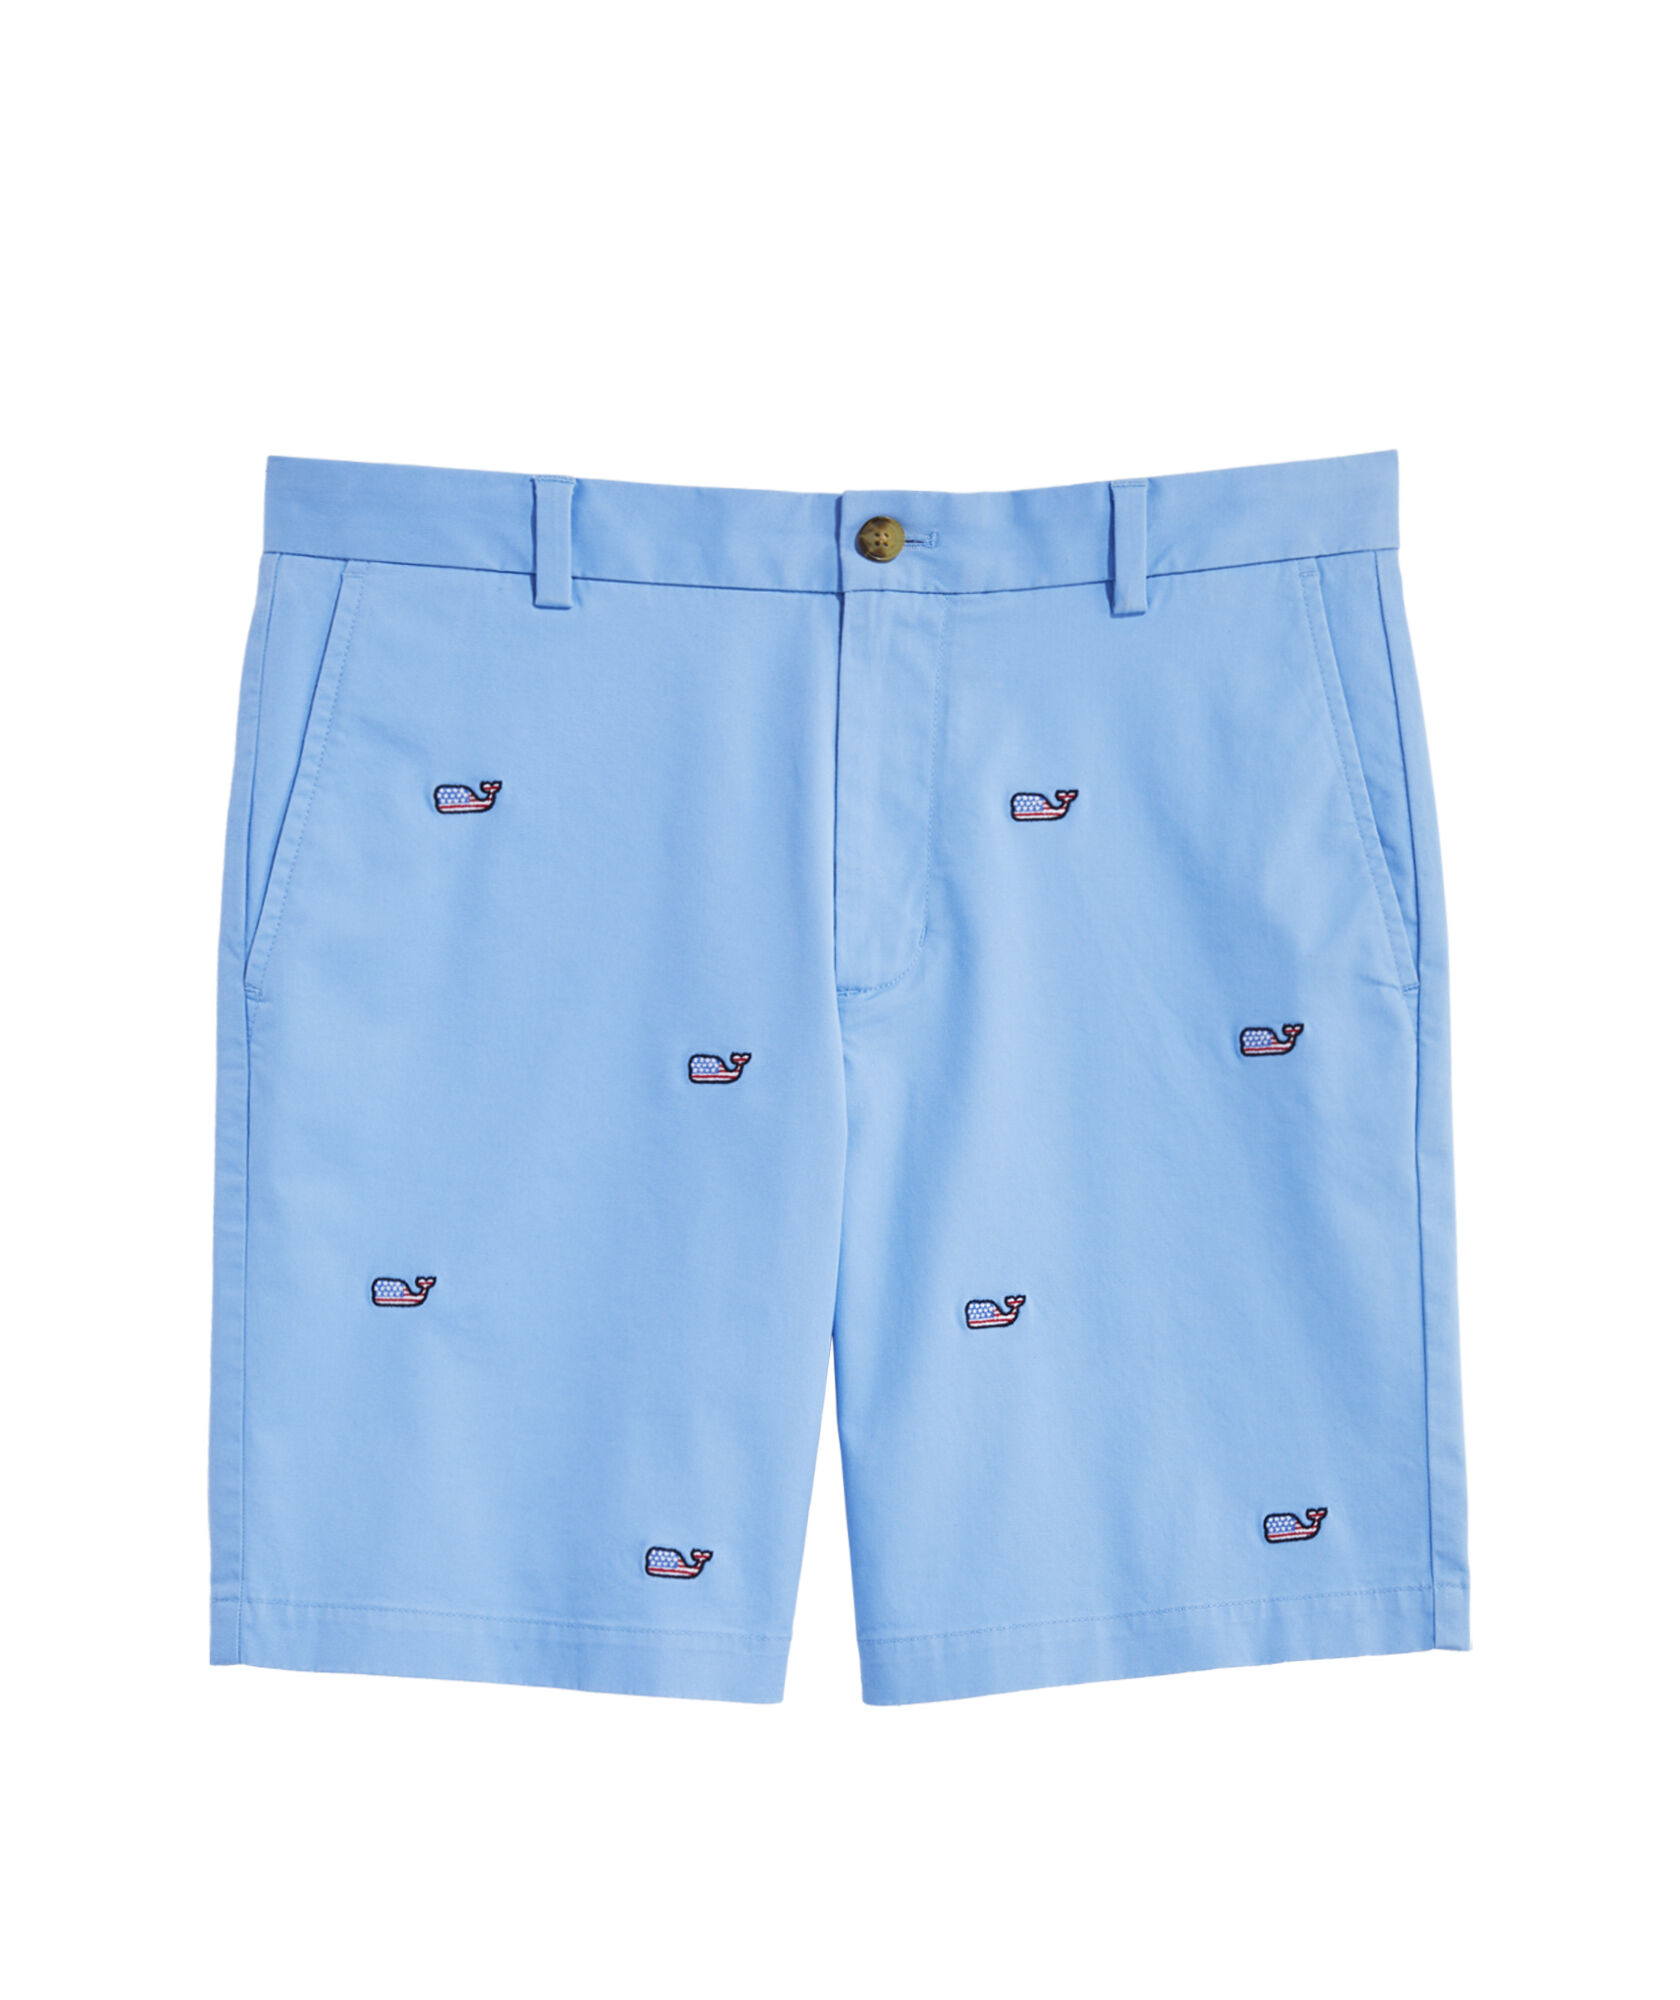 OUTLET 9 Inch Americana Whale Embroidered Breaker Shorts